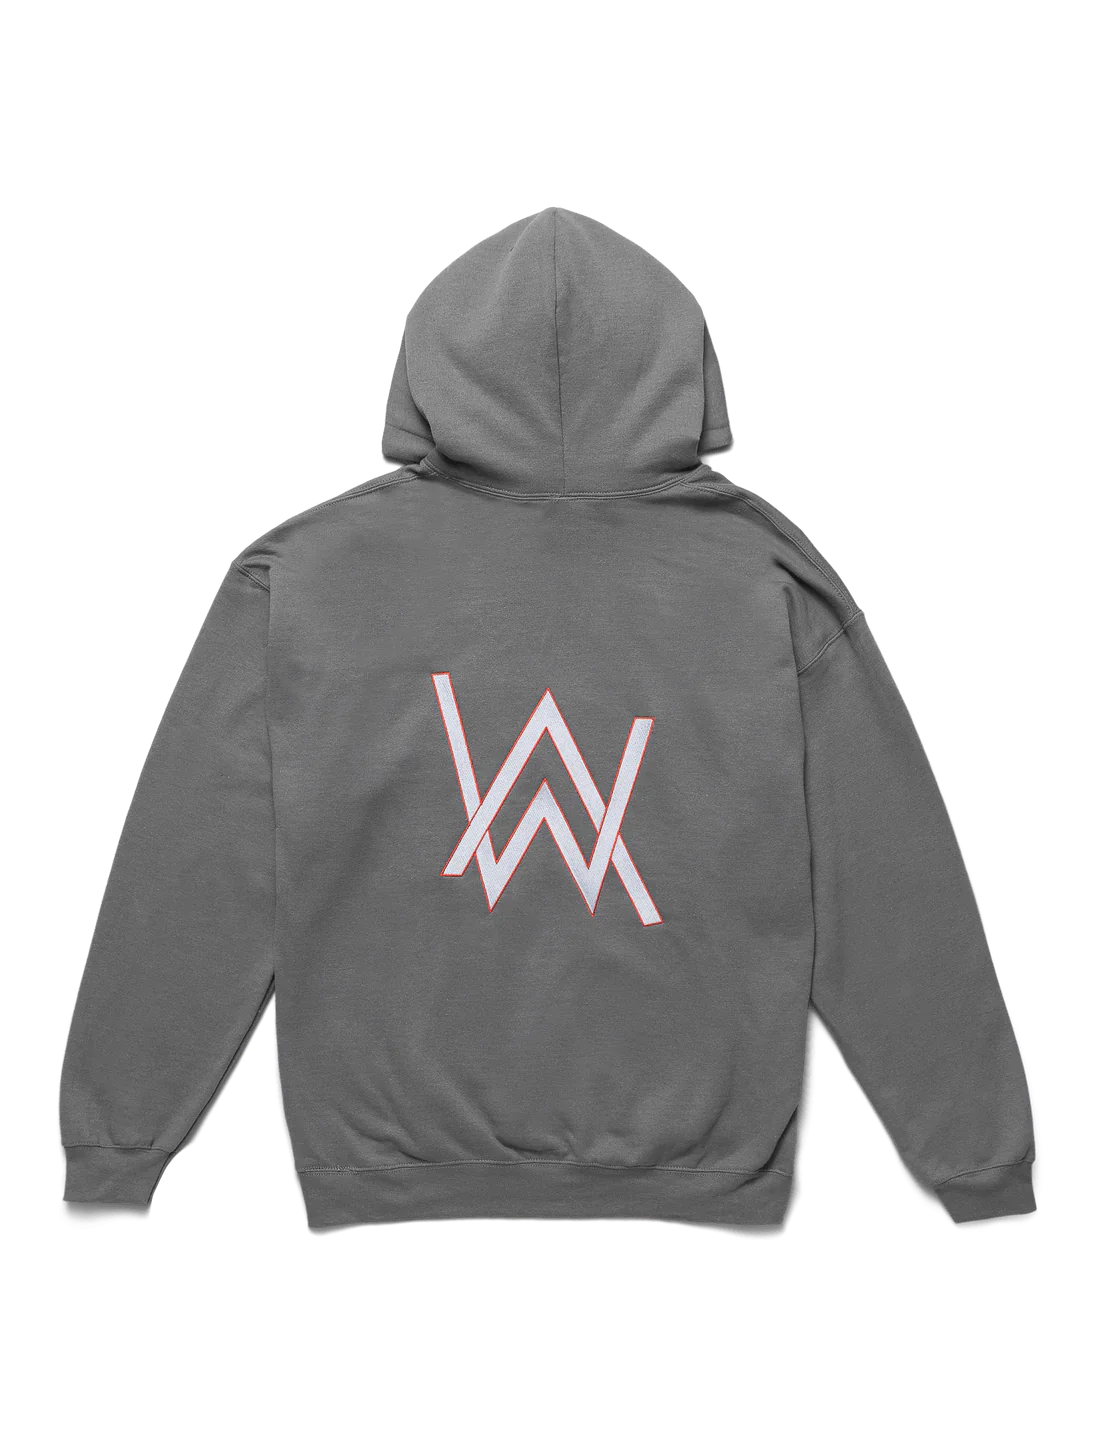 Back view of a charcoal-gray hoodie showcasing a large white Alan Walker logo with red outline, blending style and gaming culture.